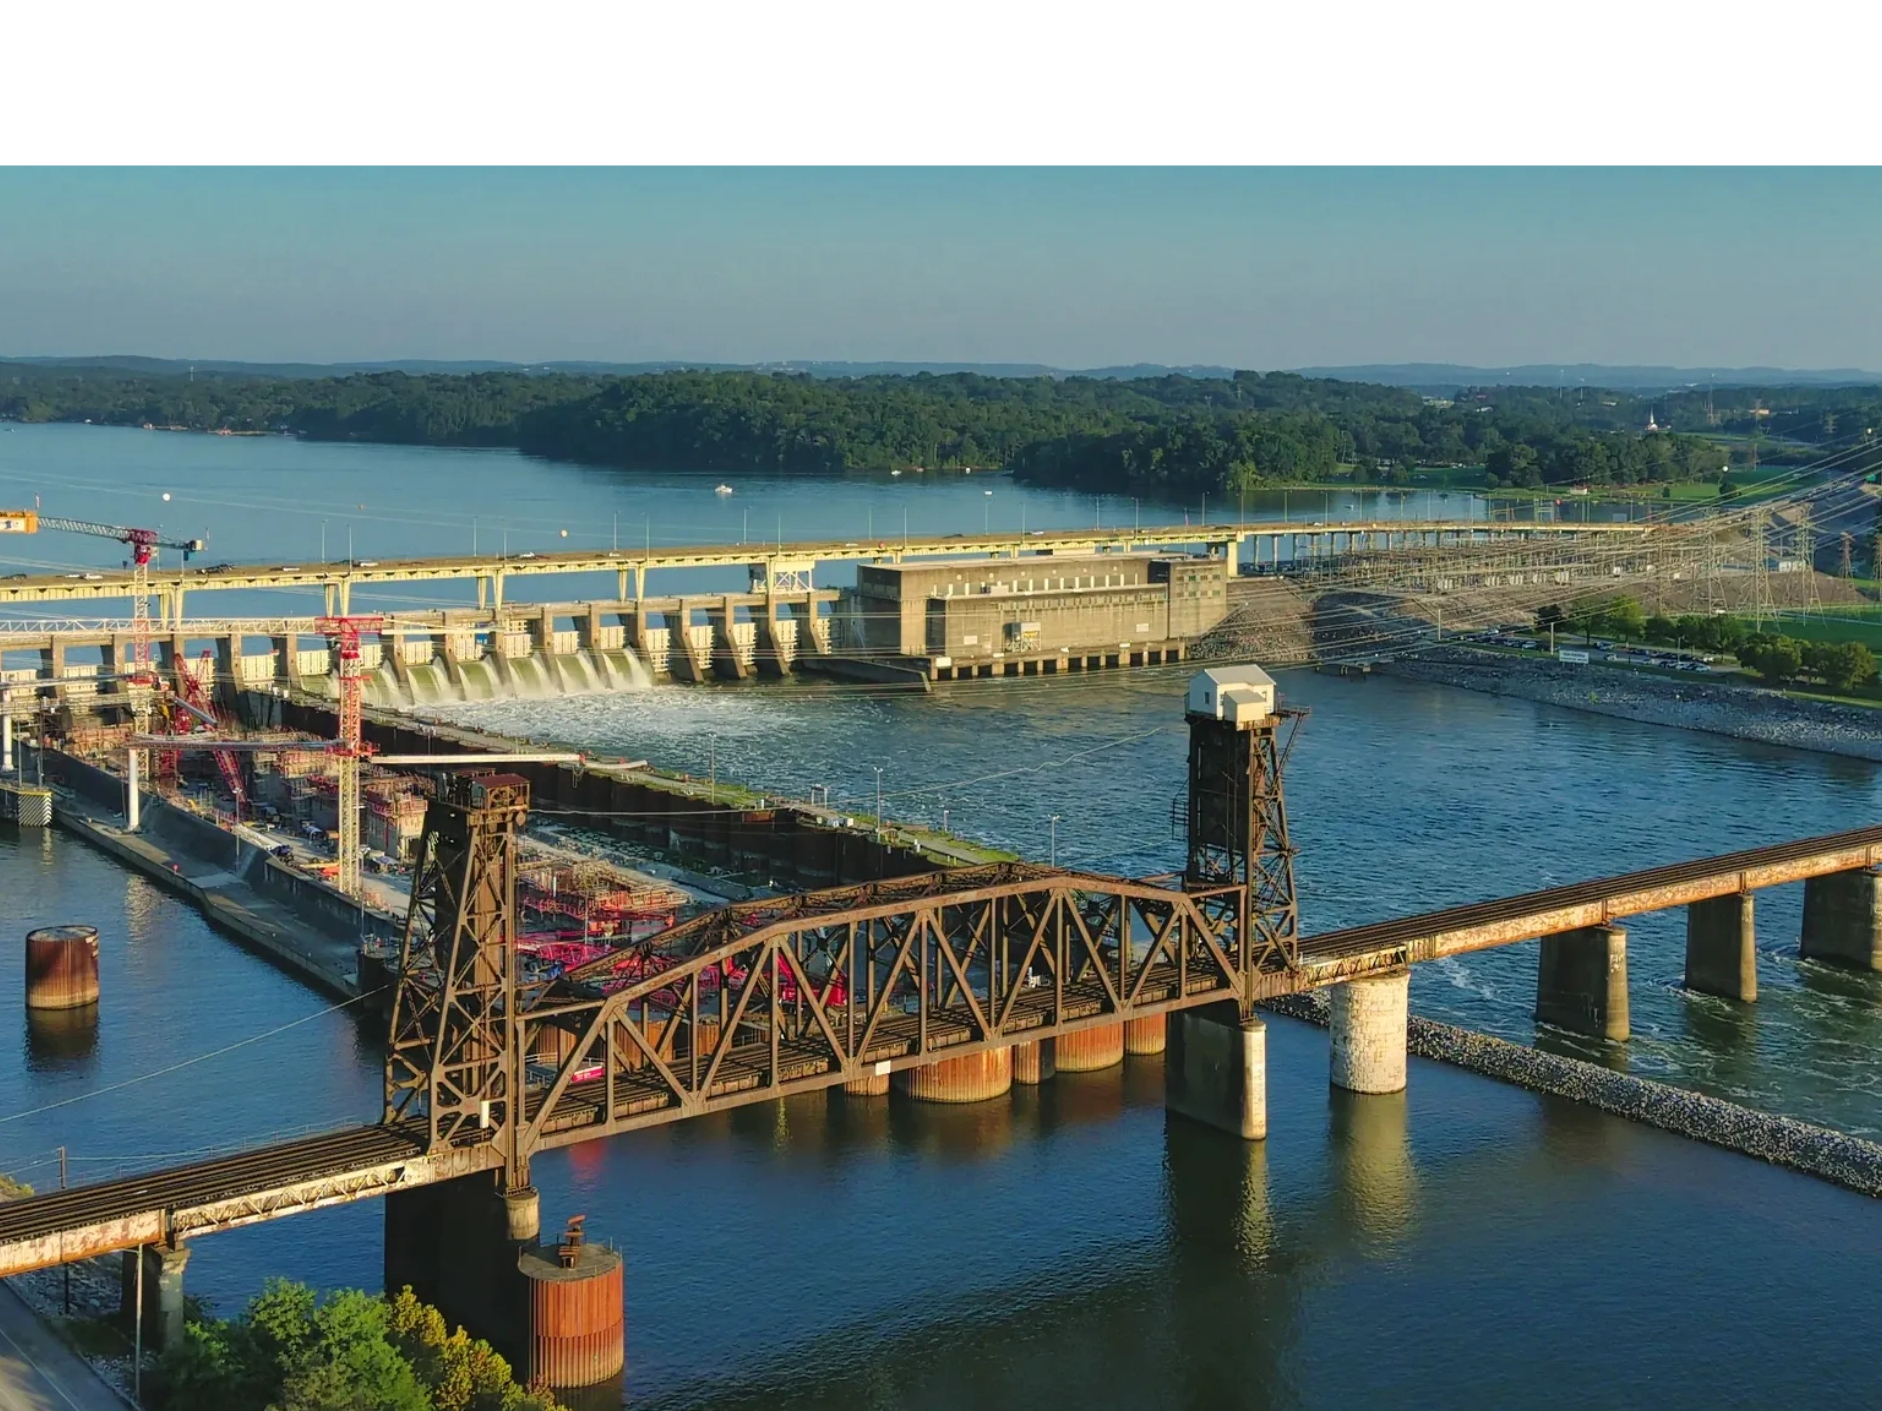 Twilight with the Tenbridge rail bridge forefront and the Chickamauga Dam in the back.
Left to right